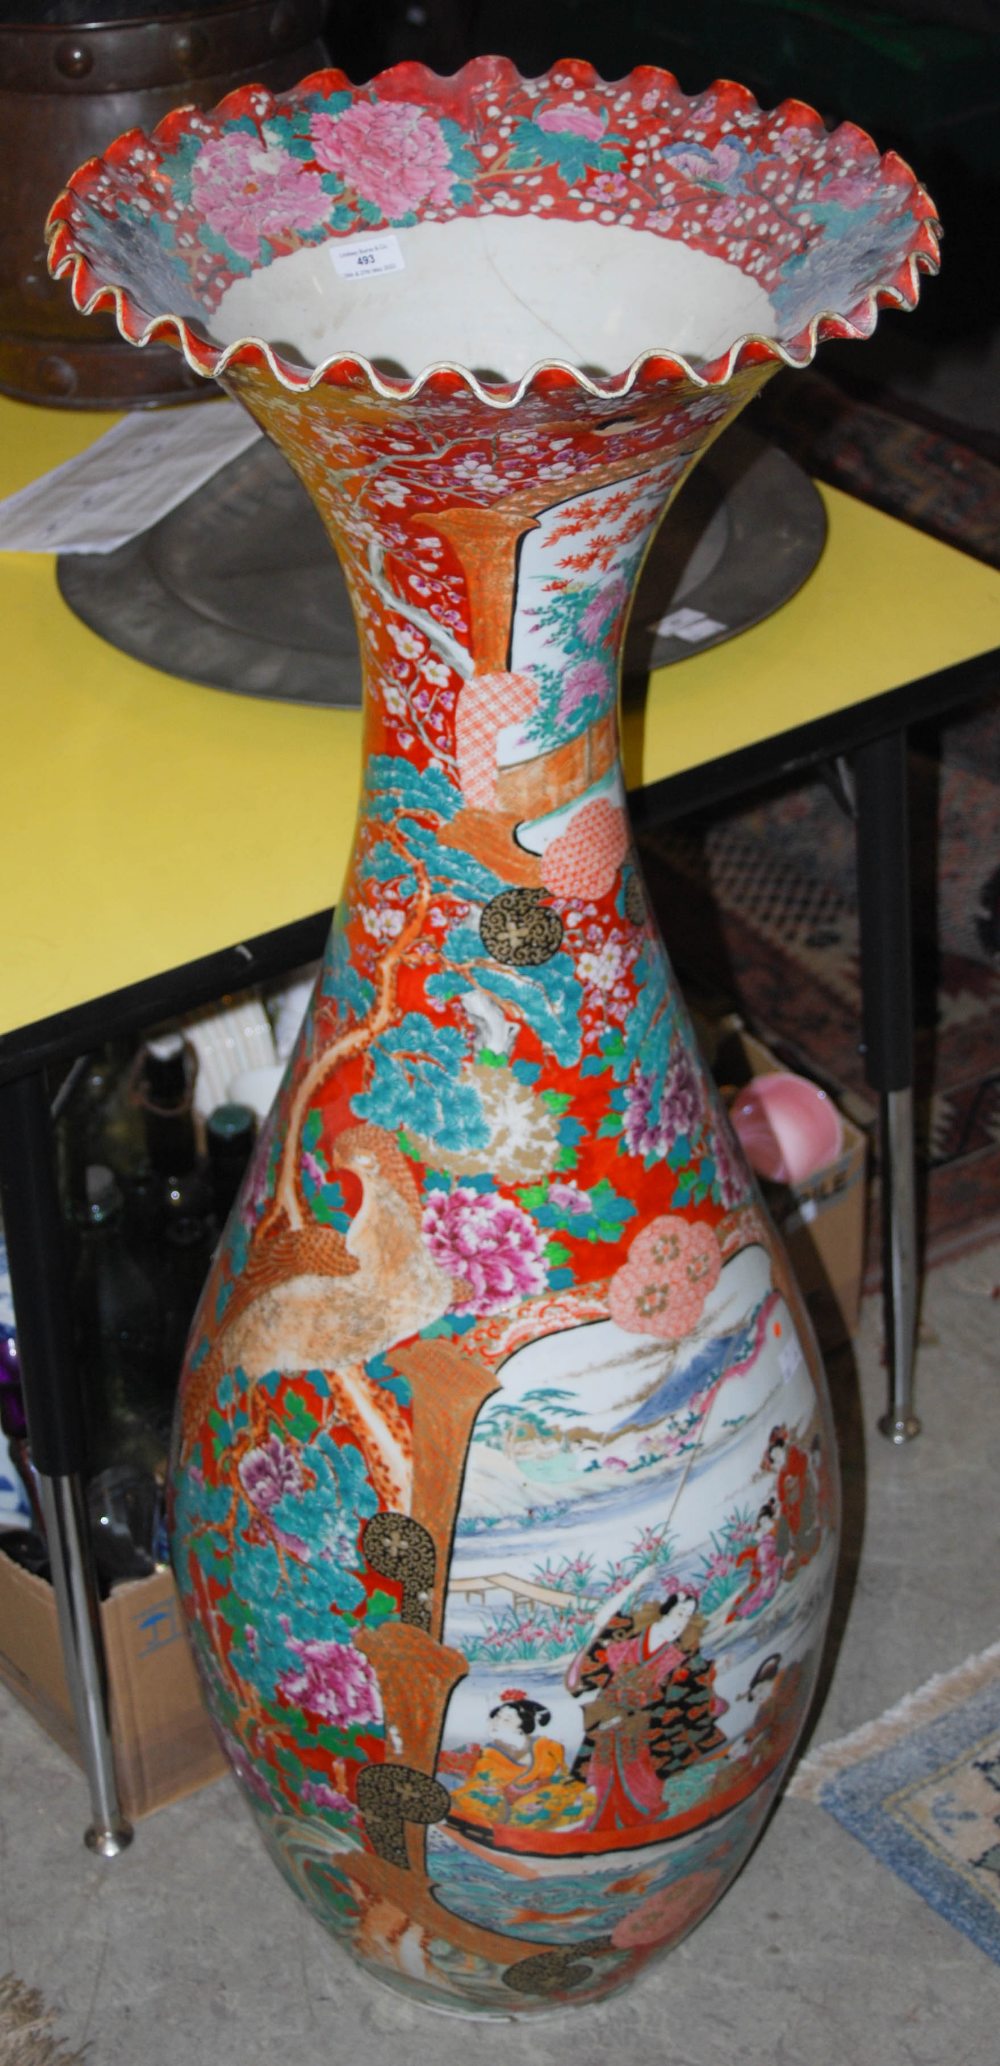 A VERY LARGE LATE 19TH / EARLY 20TH CENTURY JAPANESE PORCELAIN FLOOR VASE, BOTTLE SHAPED WITH